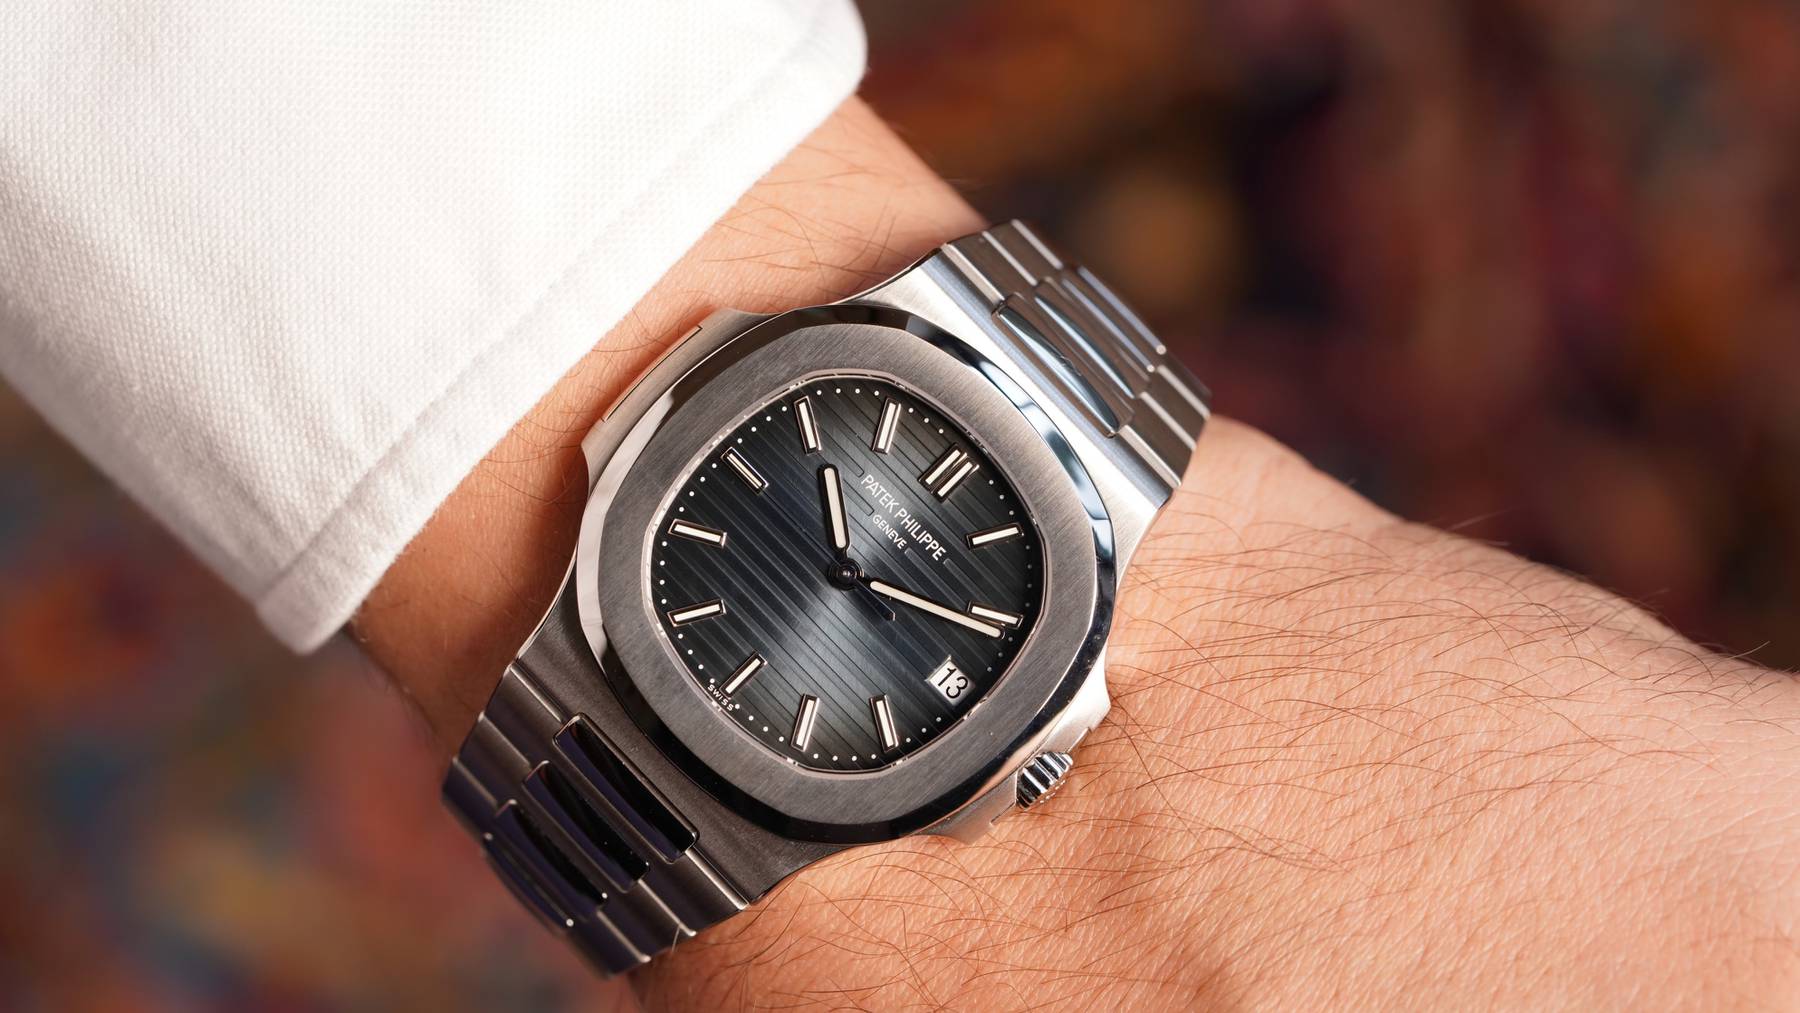 A The Patek Philippe Nautilus 5711/1A watch on a wrist.